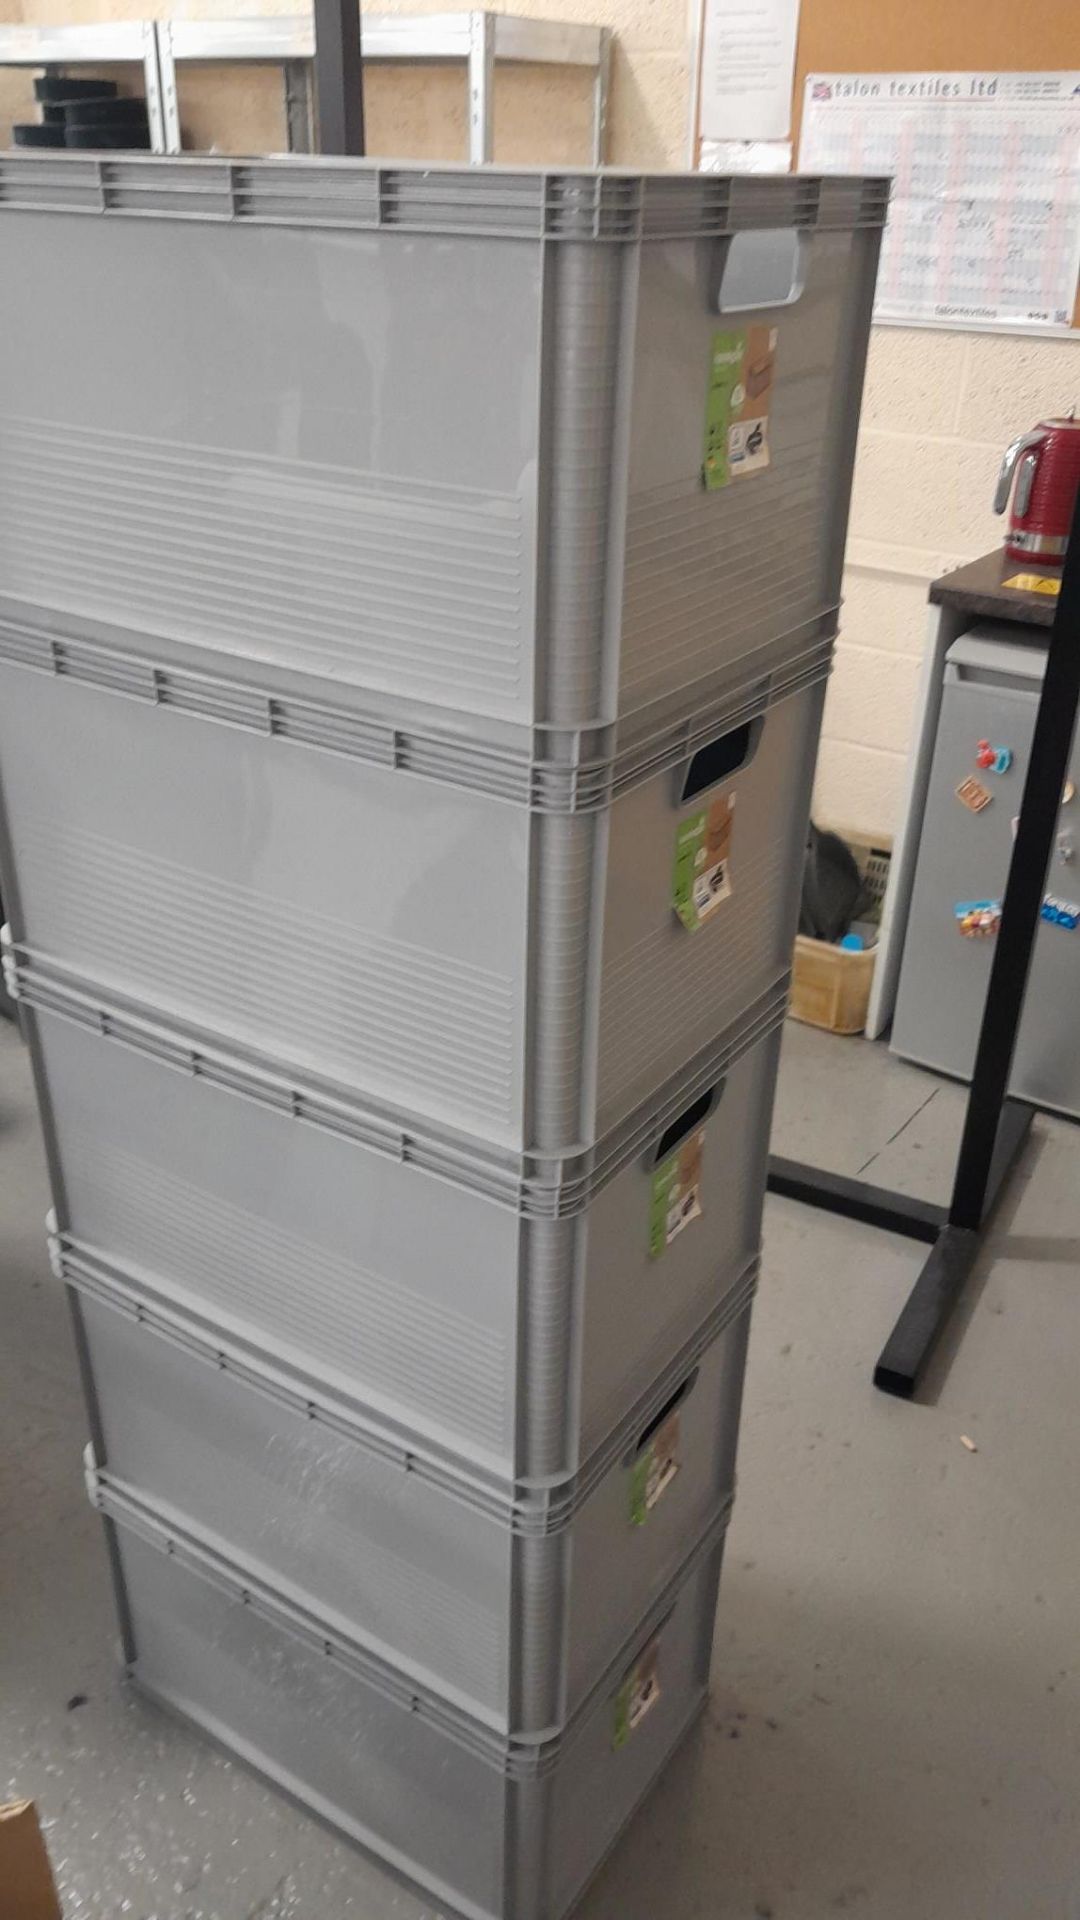 5 x Keeeper Robert 64litre storage boxes - Image 2 of 2